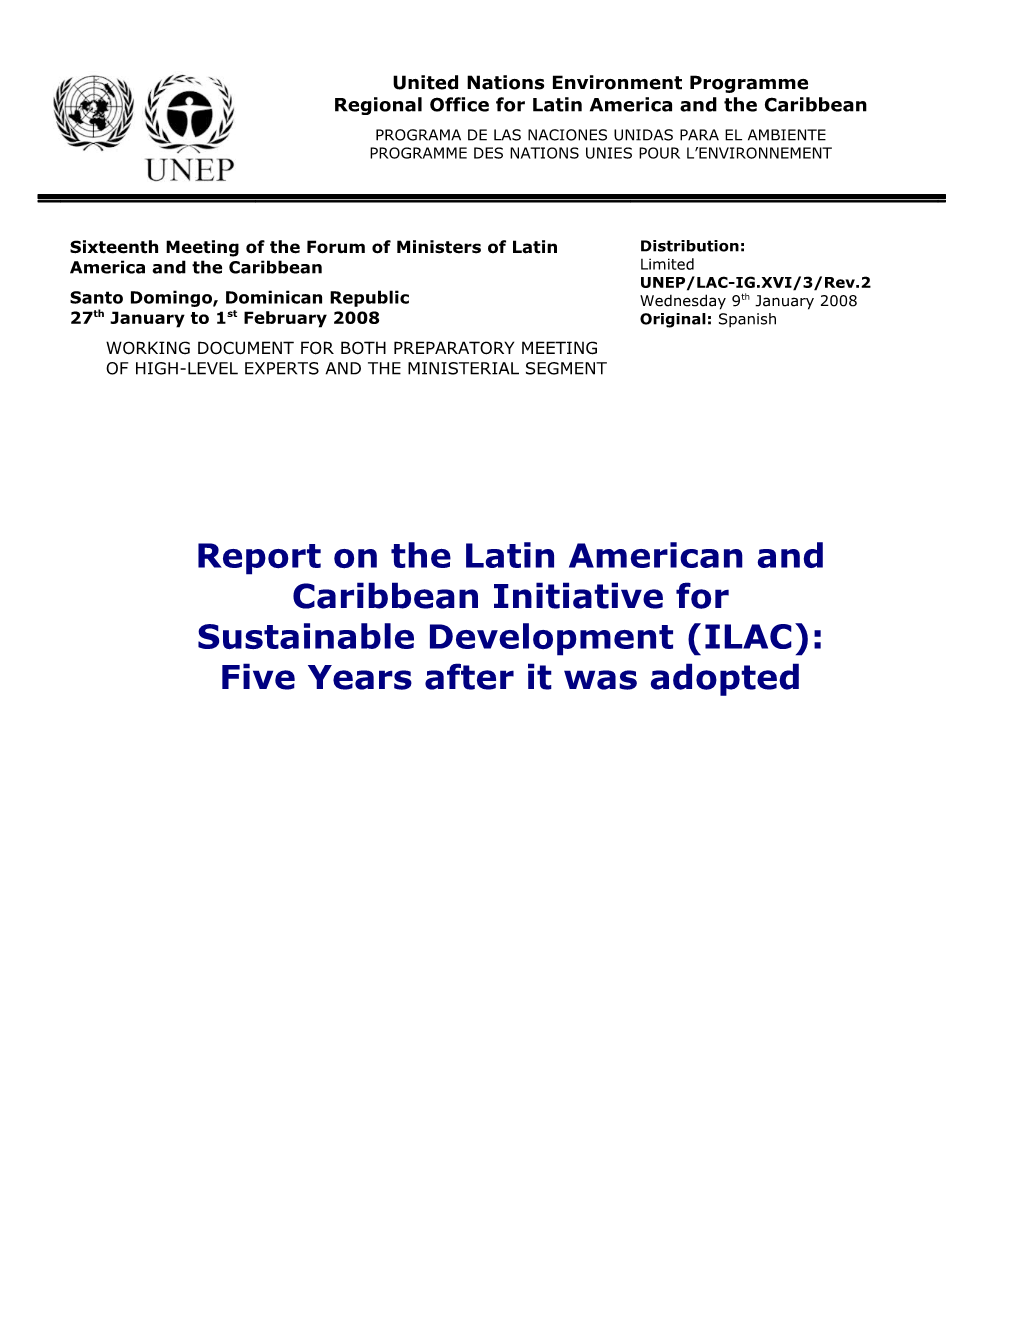 The Latin American and Caribbean Initiative for Sustainable Development (ILAC): Five Years